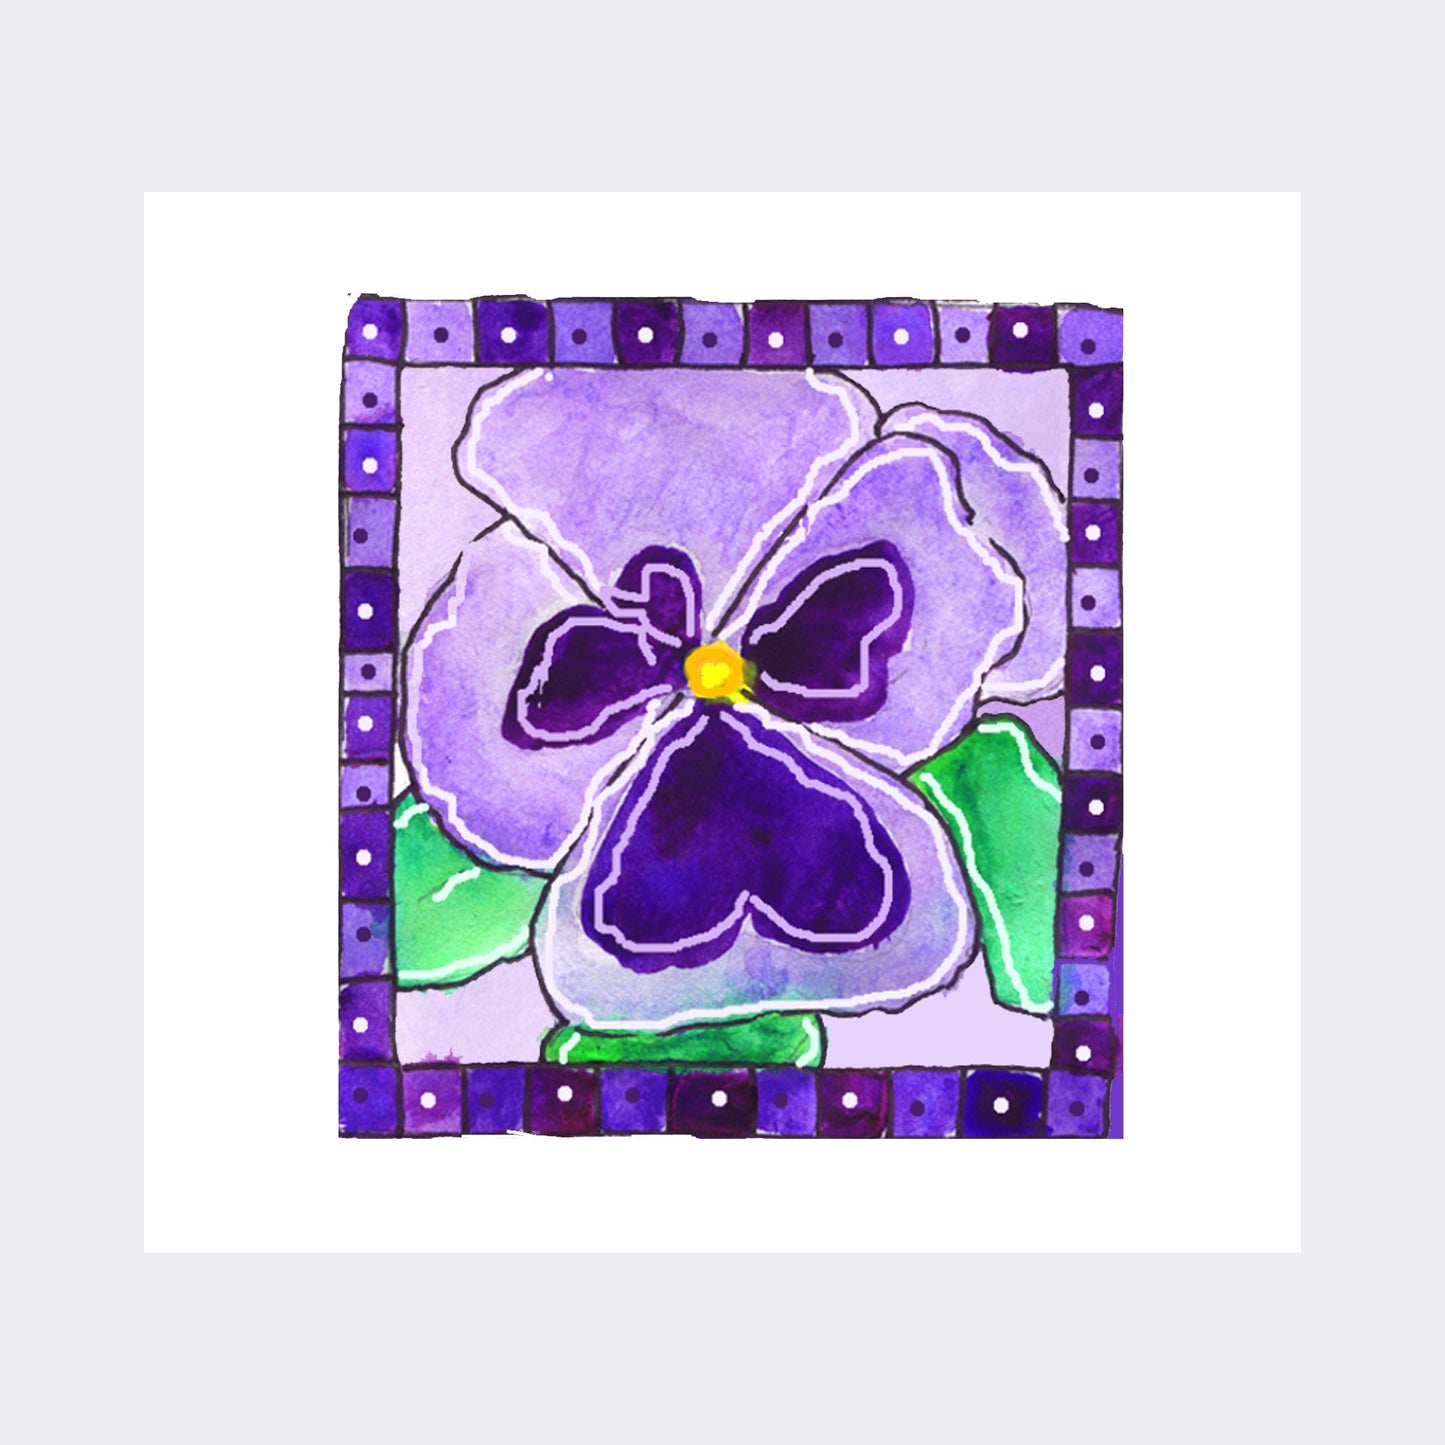 Deep Purple - Pansies Square Note Cards (Six Cards)